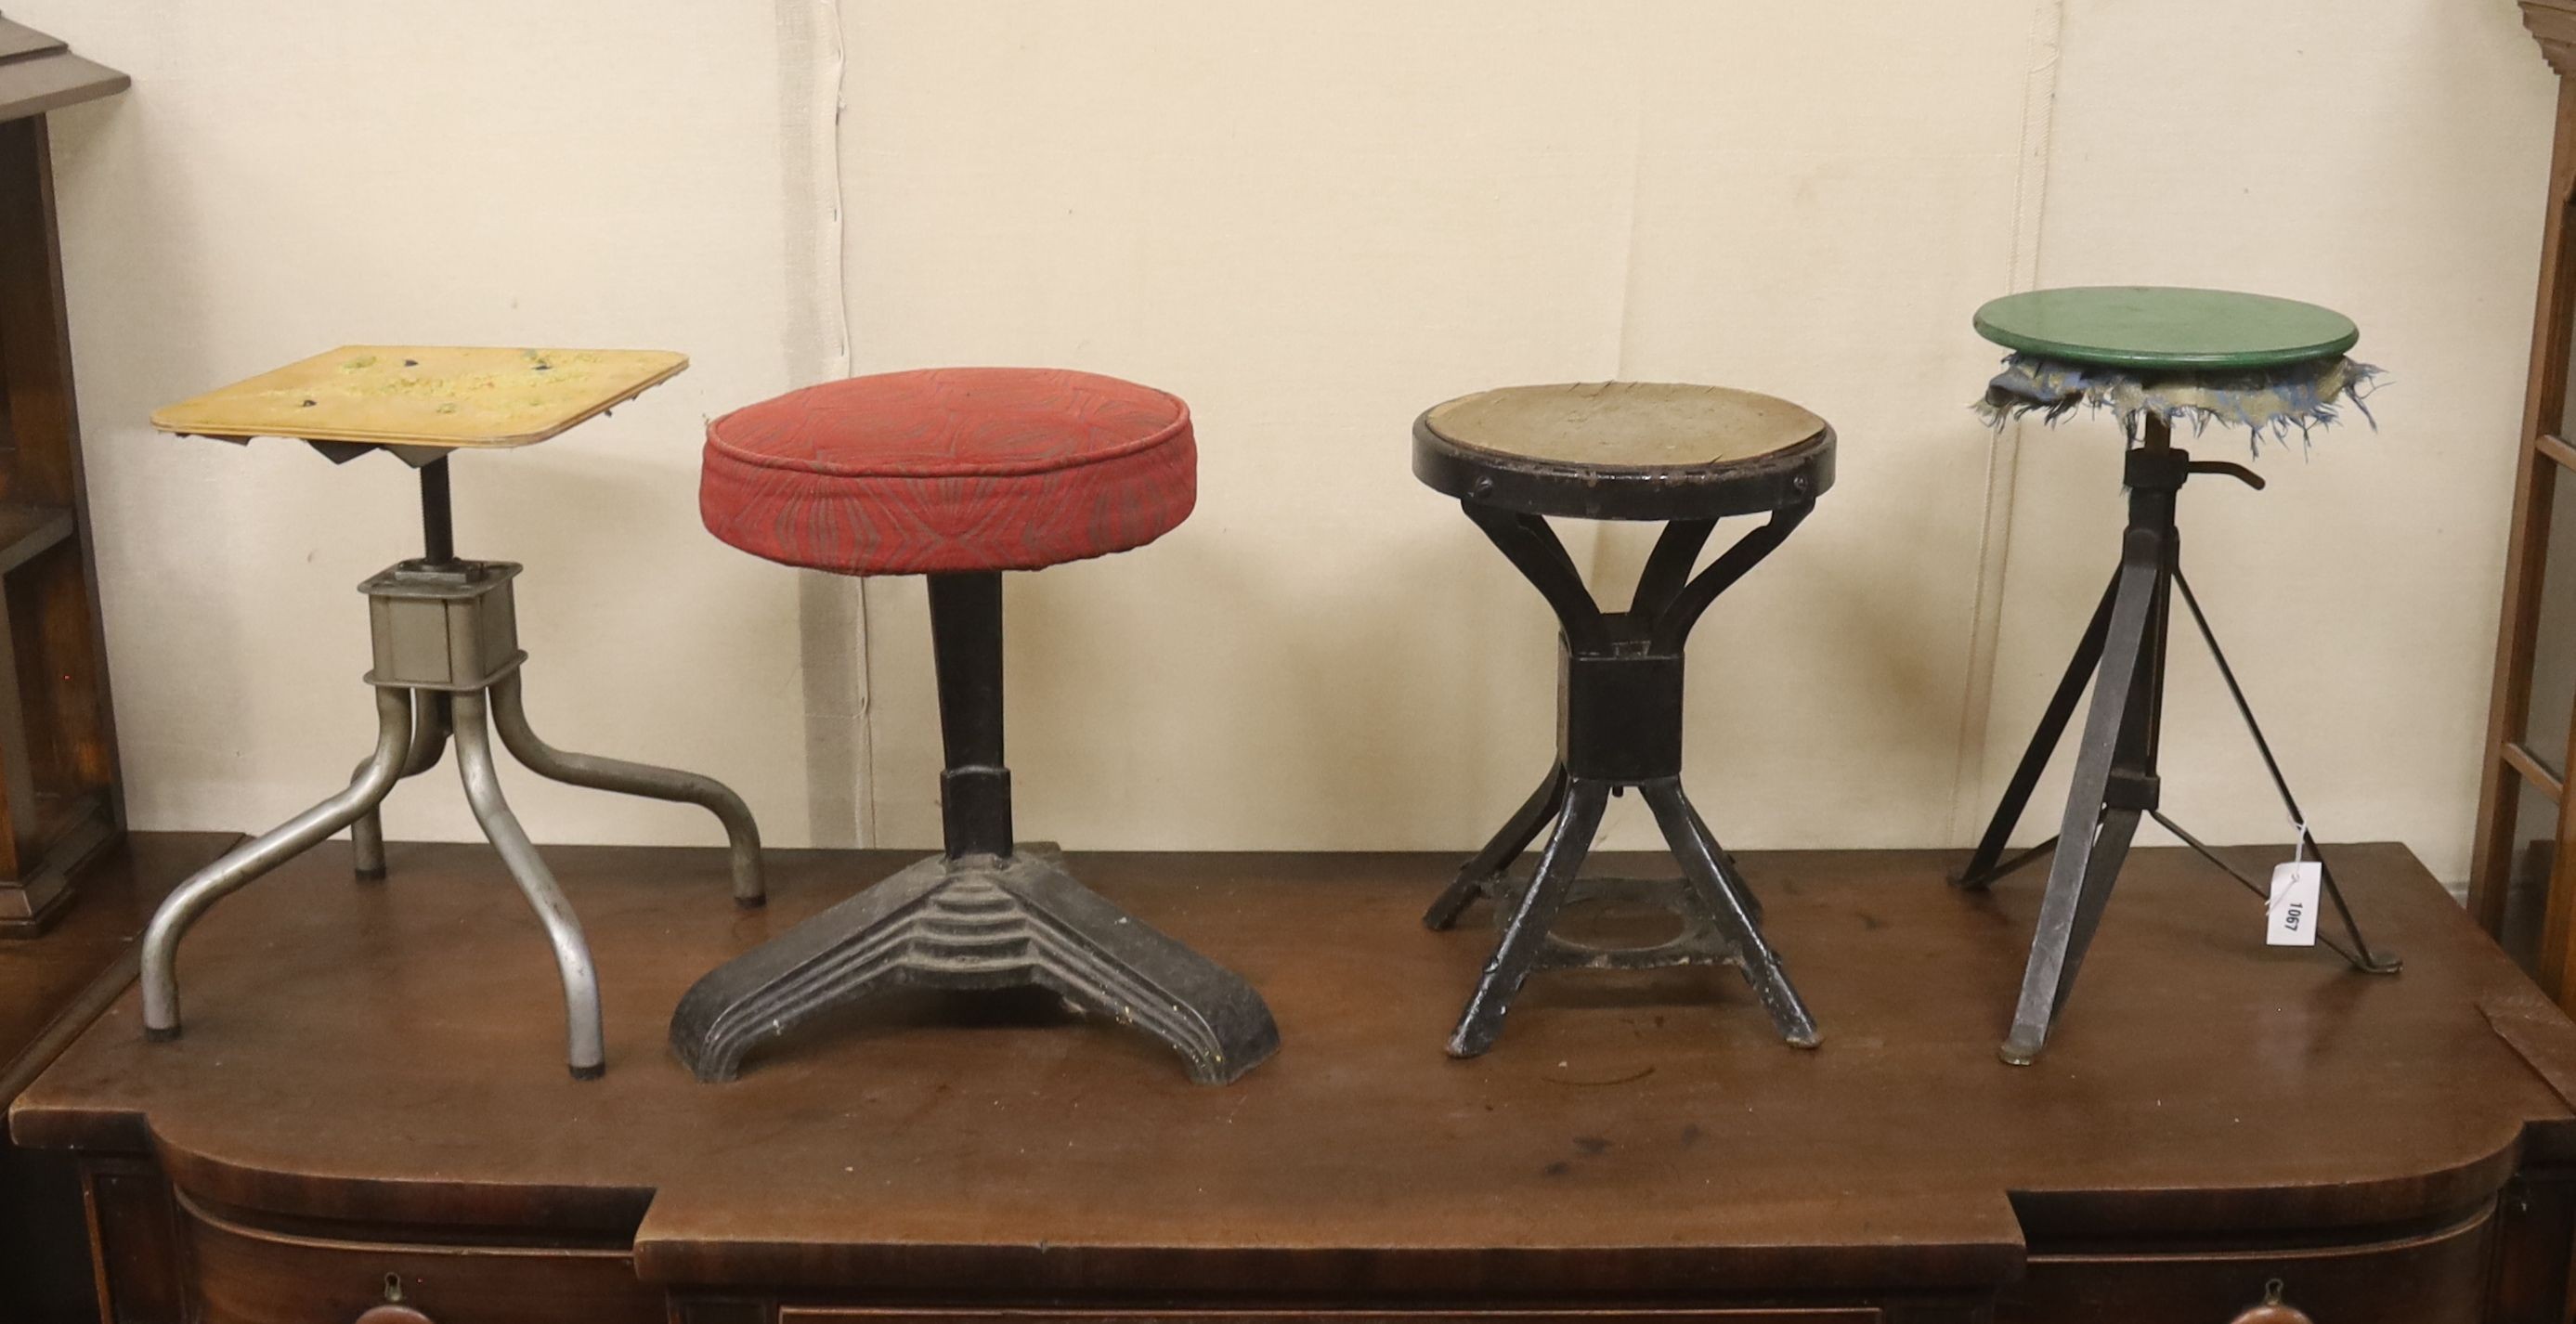 Four industrial style stools